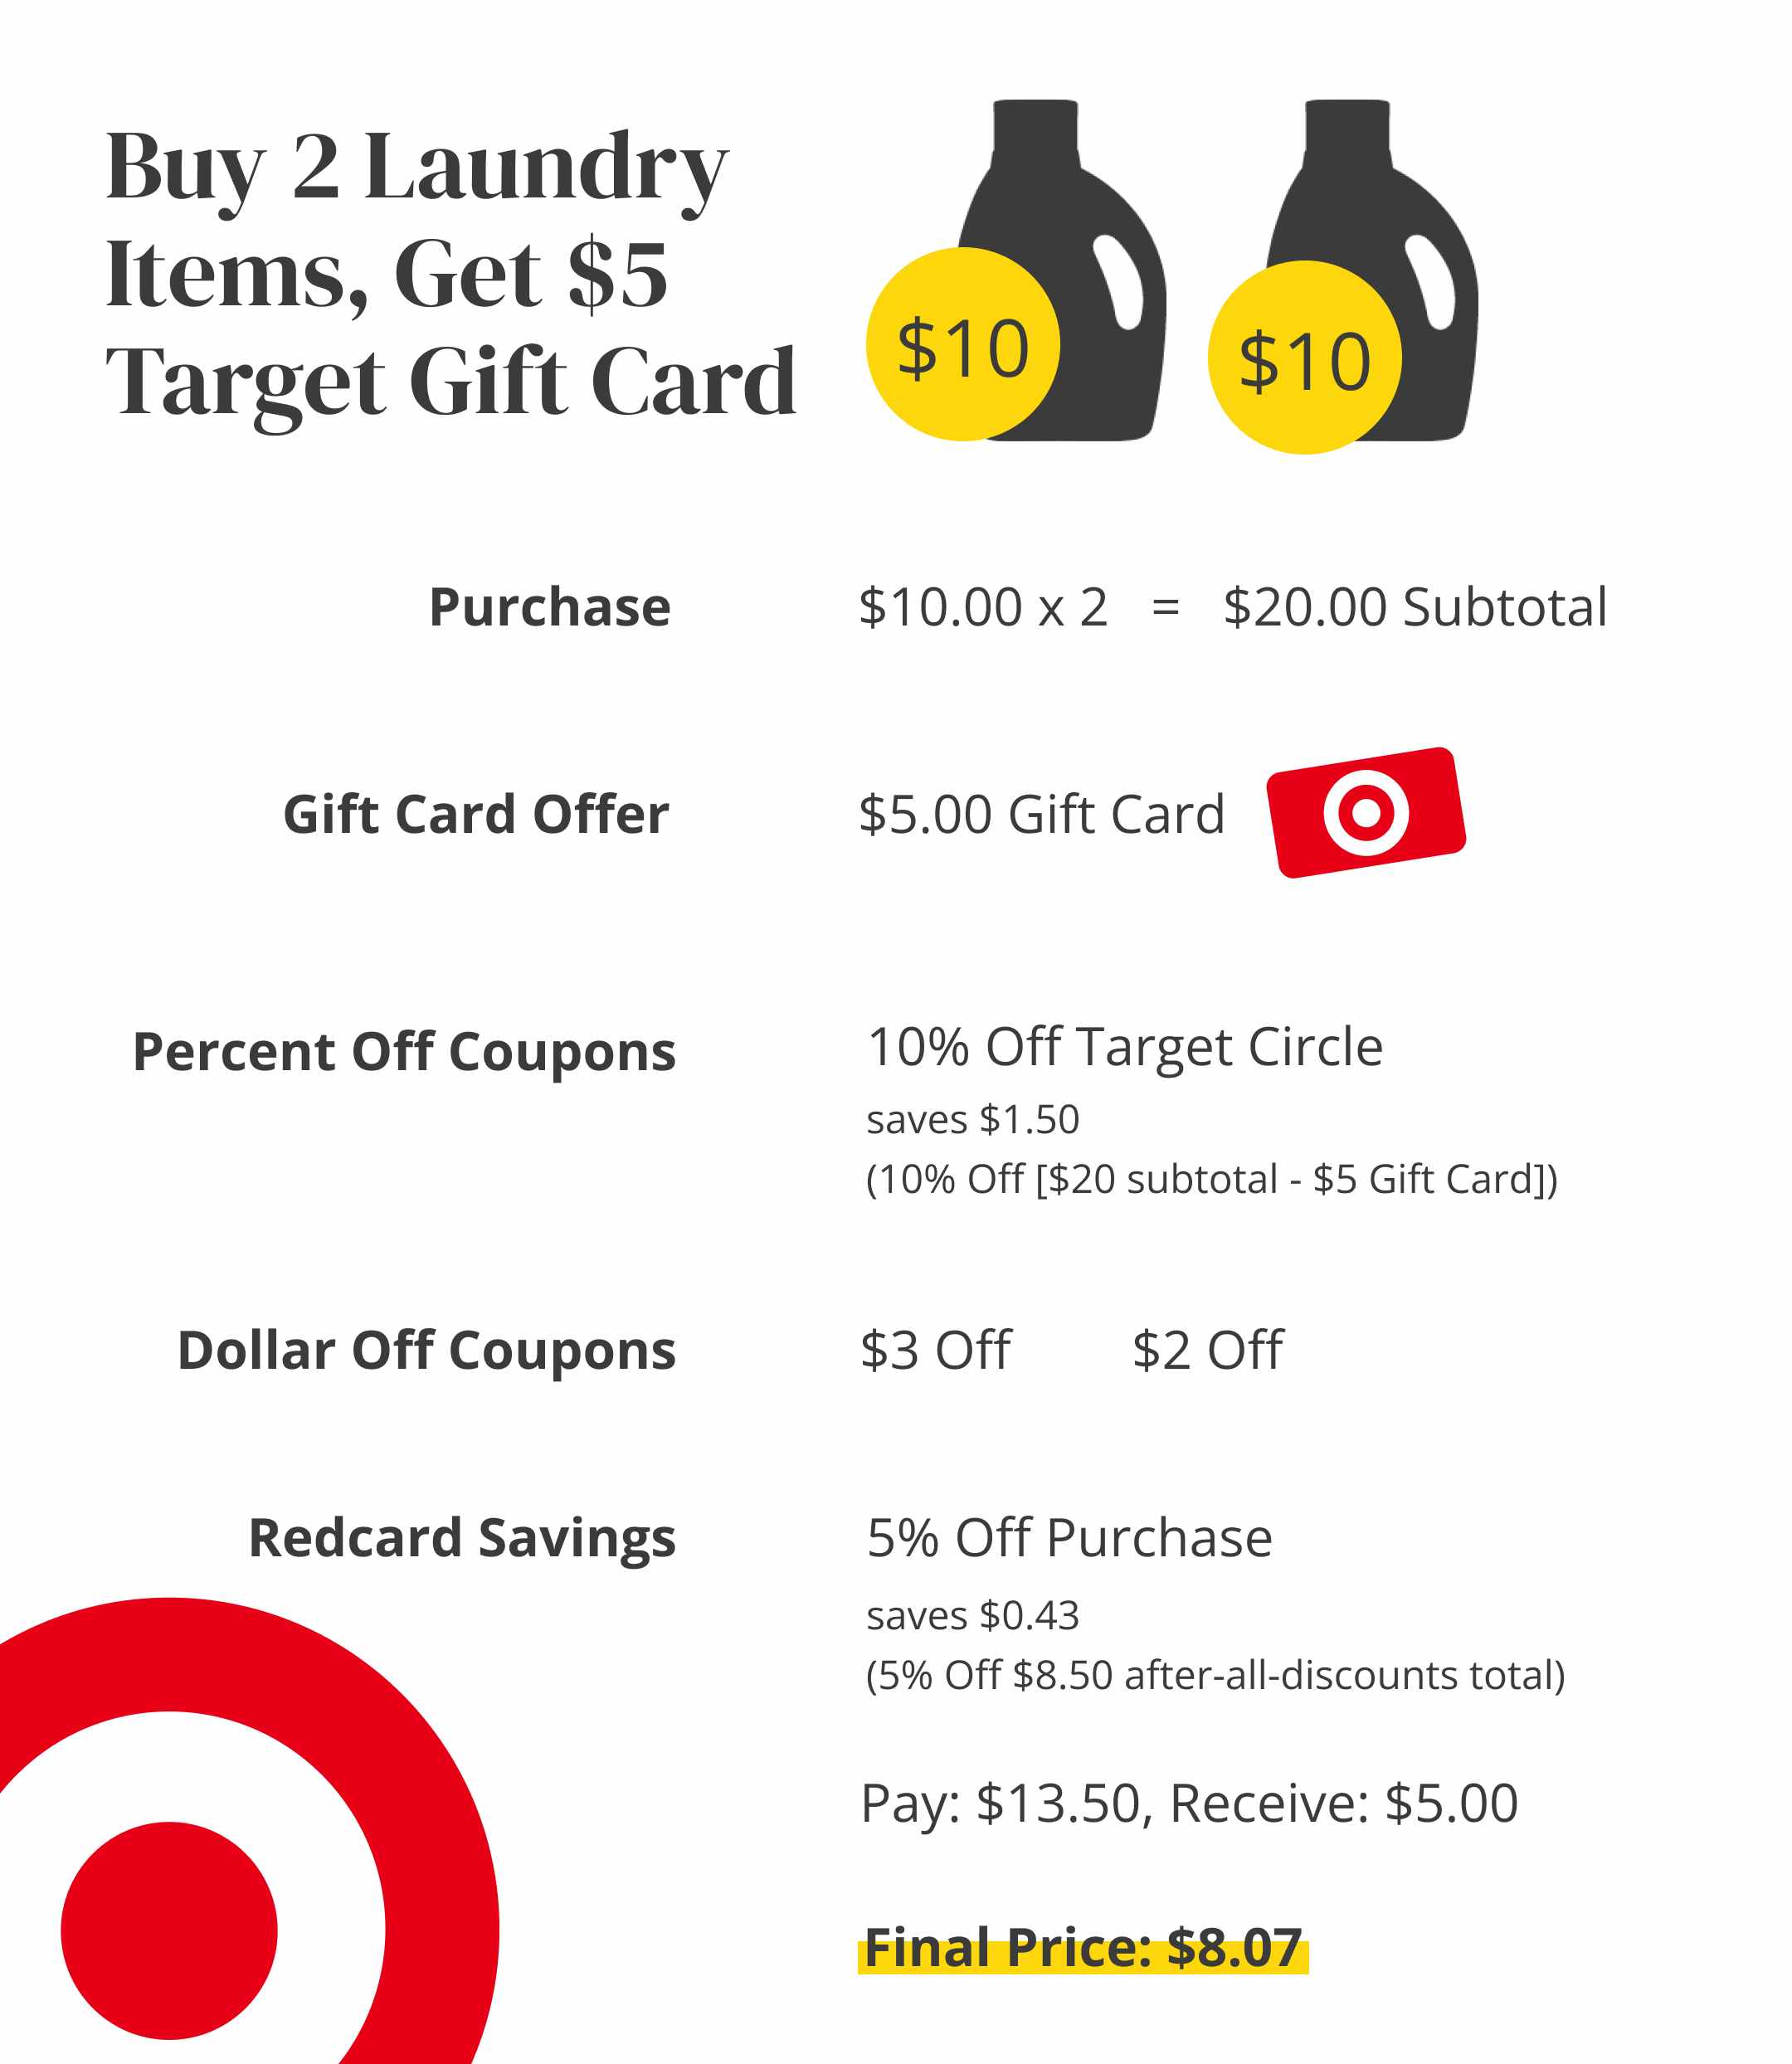 https://prod-cdn-thekrazycouponlady.imgix.net/wp-content/uploads/2023/05/target-couponmath-edit-1683664652-1683664652.png?auto=format&fit=fill&q=25